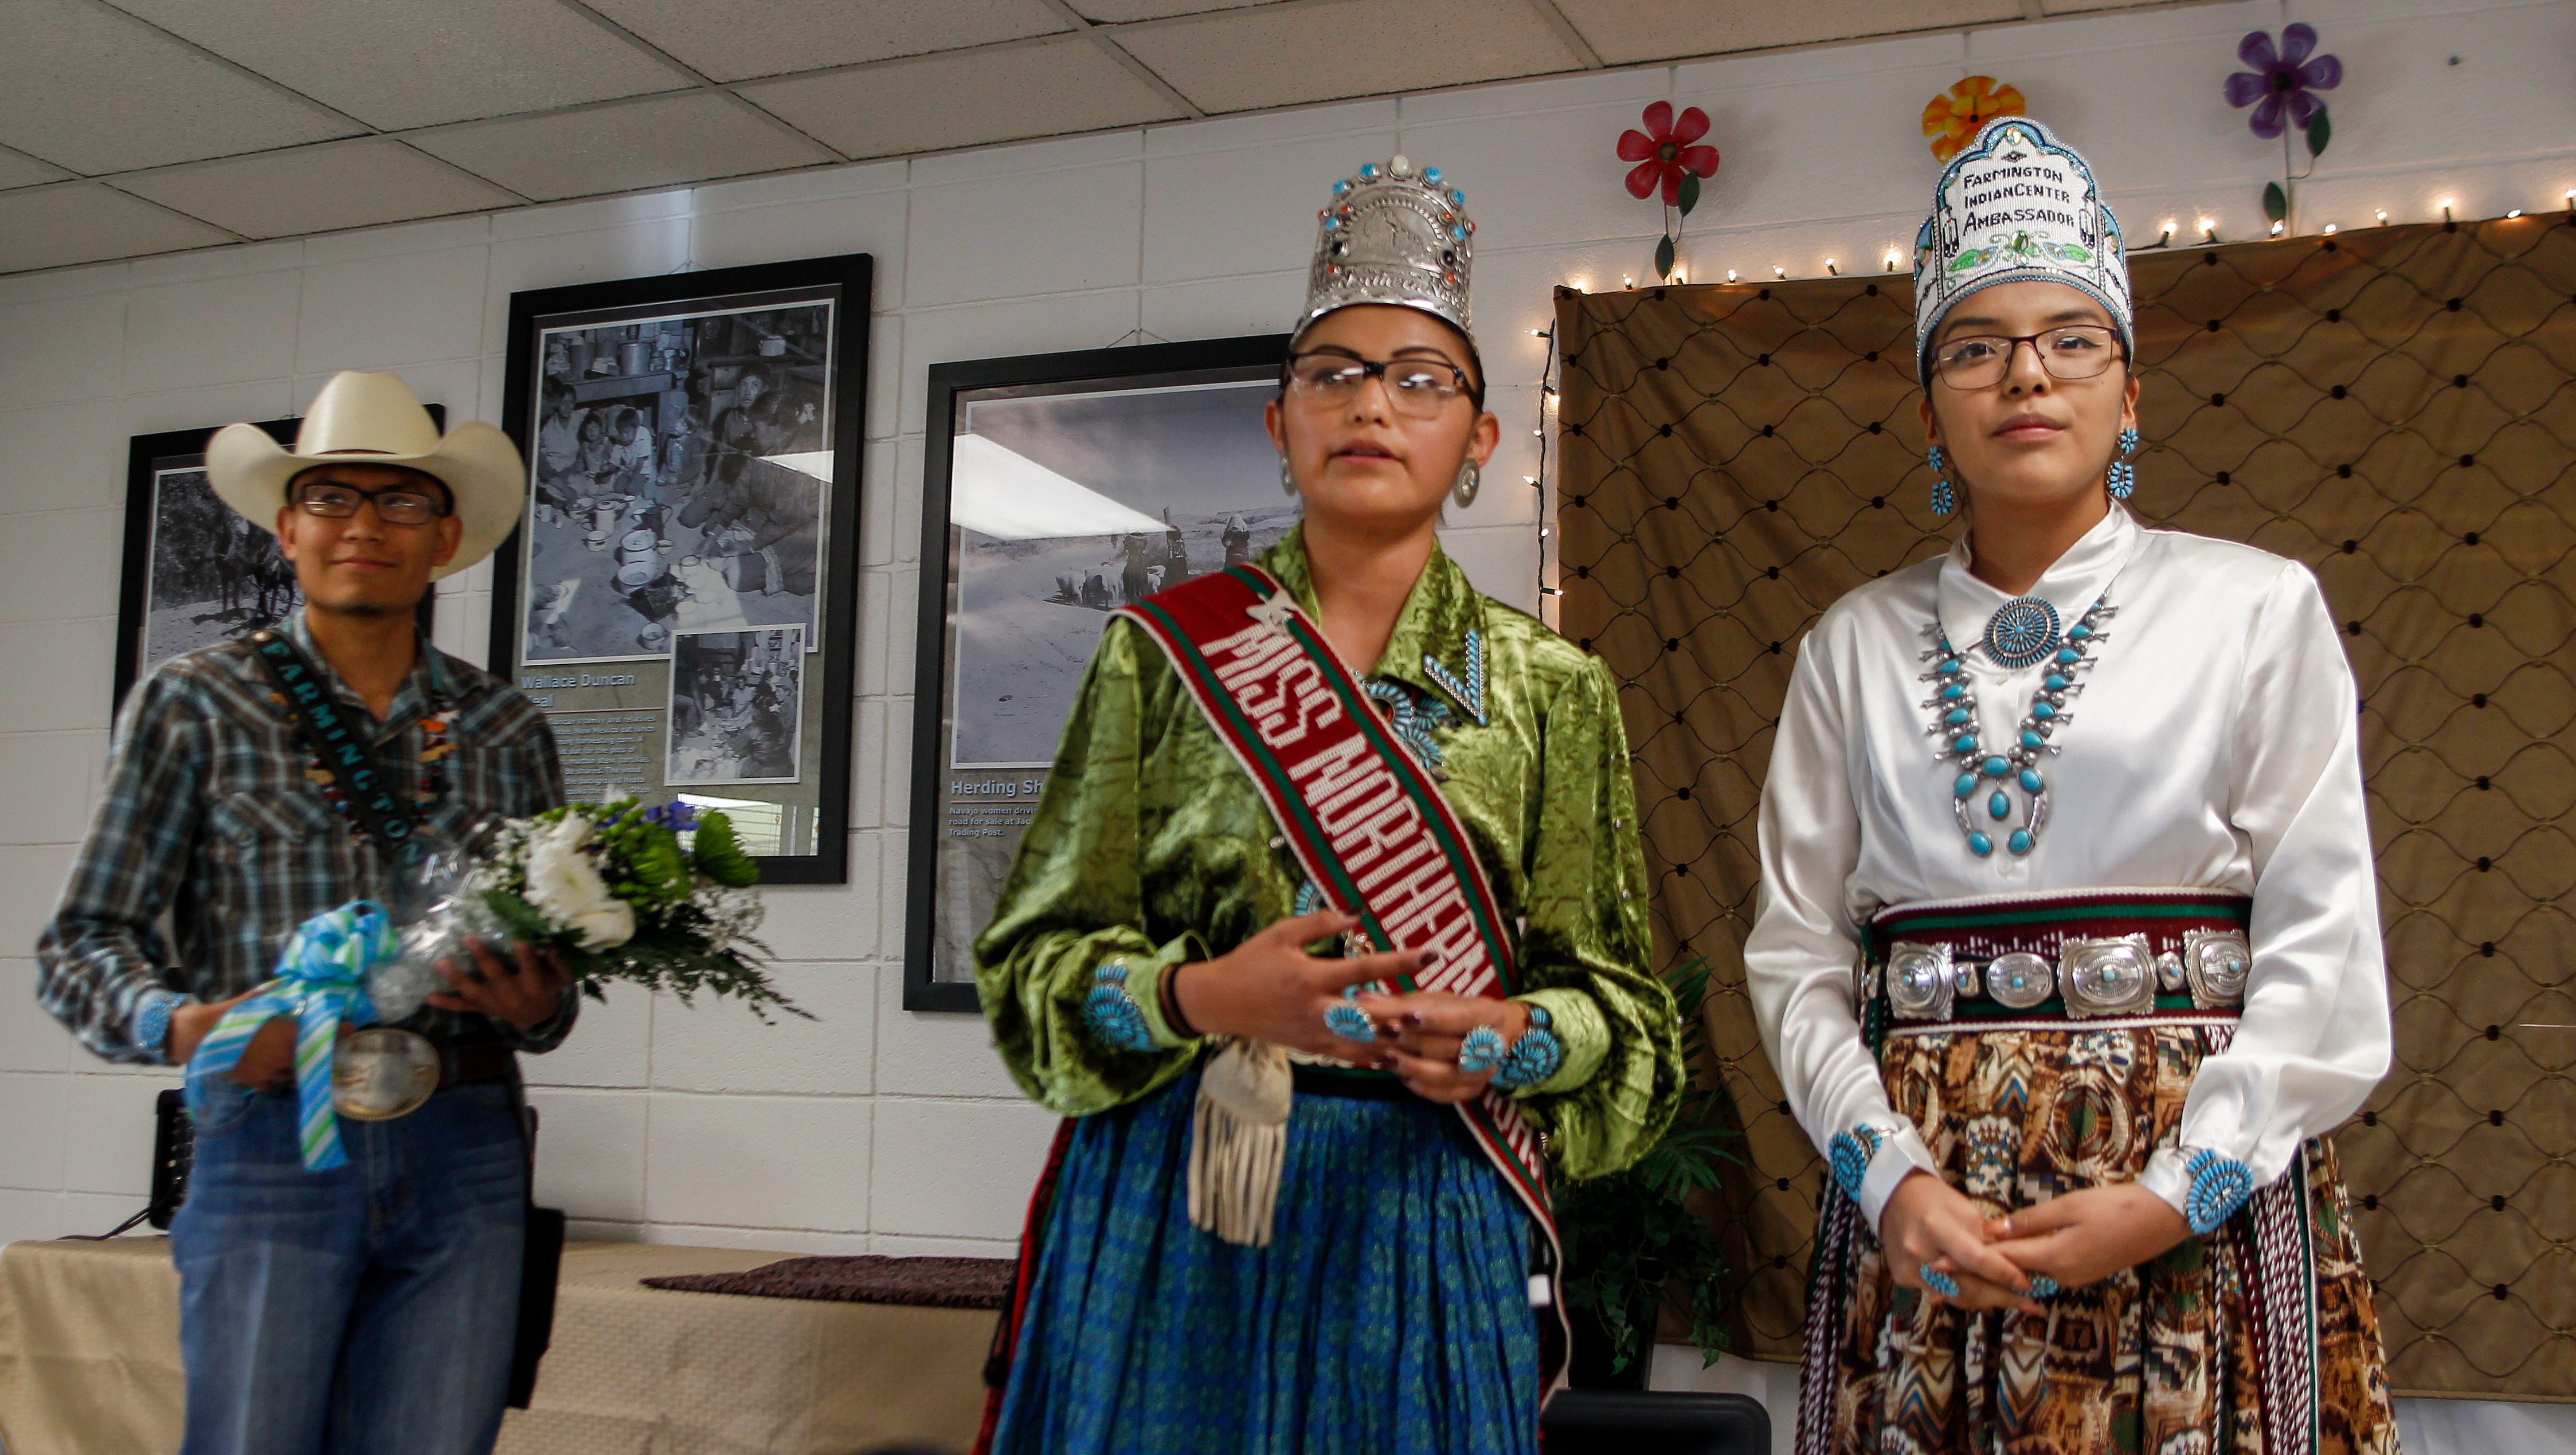 Outgoing Farmington American Indian Ambassador Christopher Taylor Benally and Miss Northern Navajo Ariana Roselyn Young congratulate newly crowned Farmington American Indian Ambassador Nikeisha Kee Thursday during a ceremony at the Farmington Indian Center.